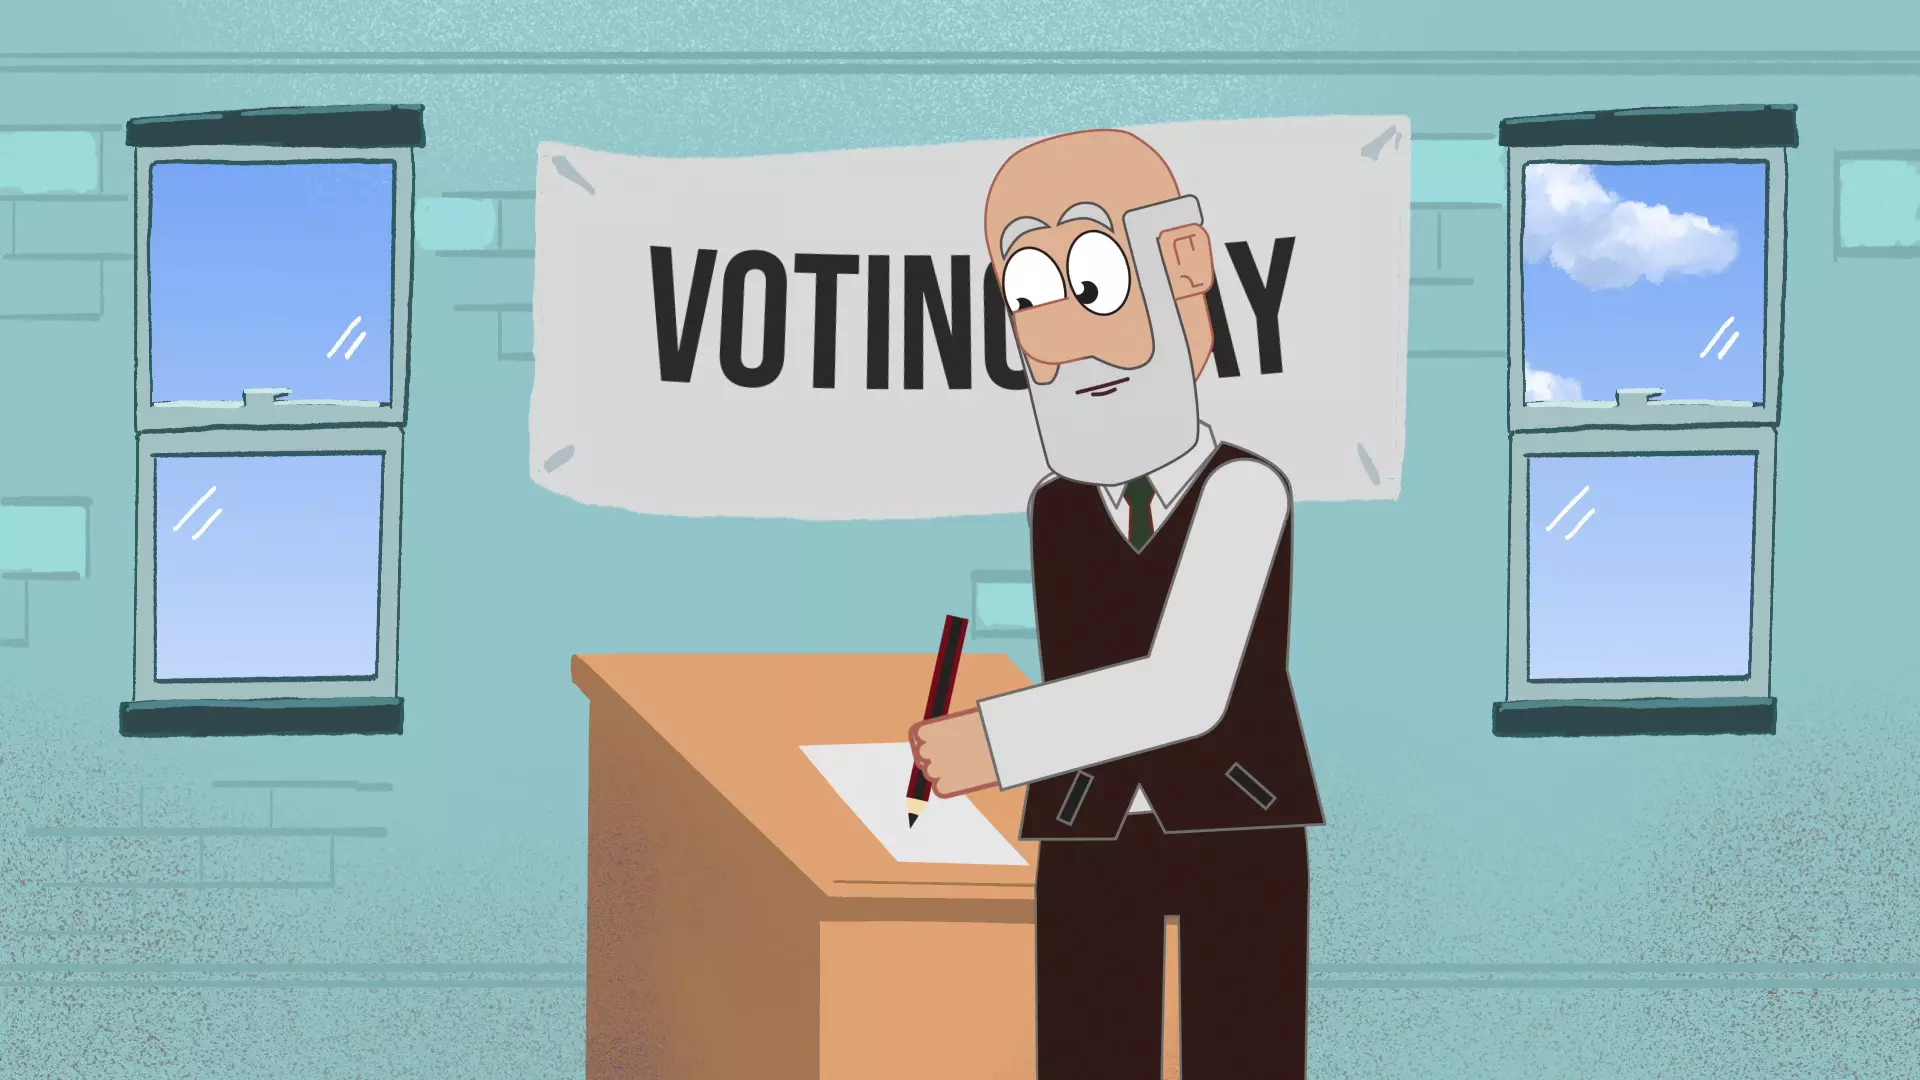 Blog 8: The Australian Constitution and the Right to Vote